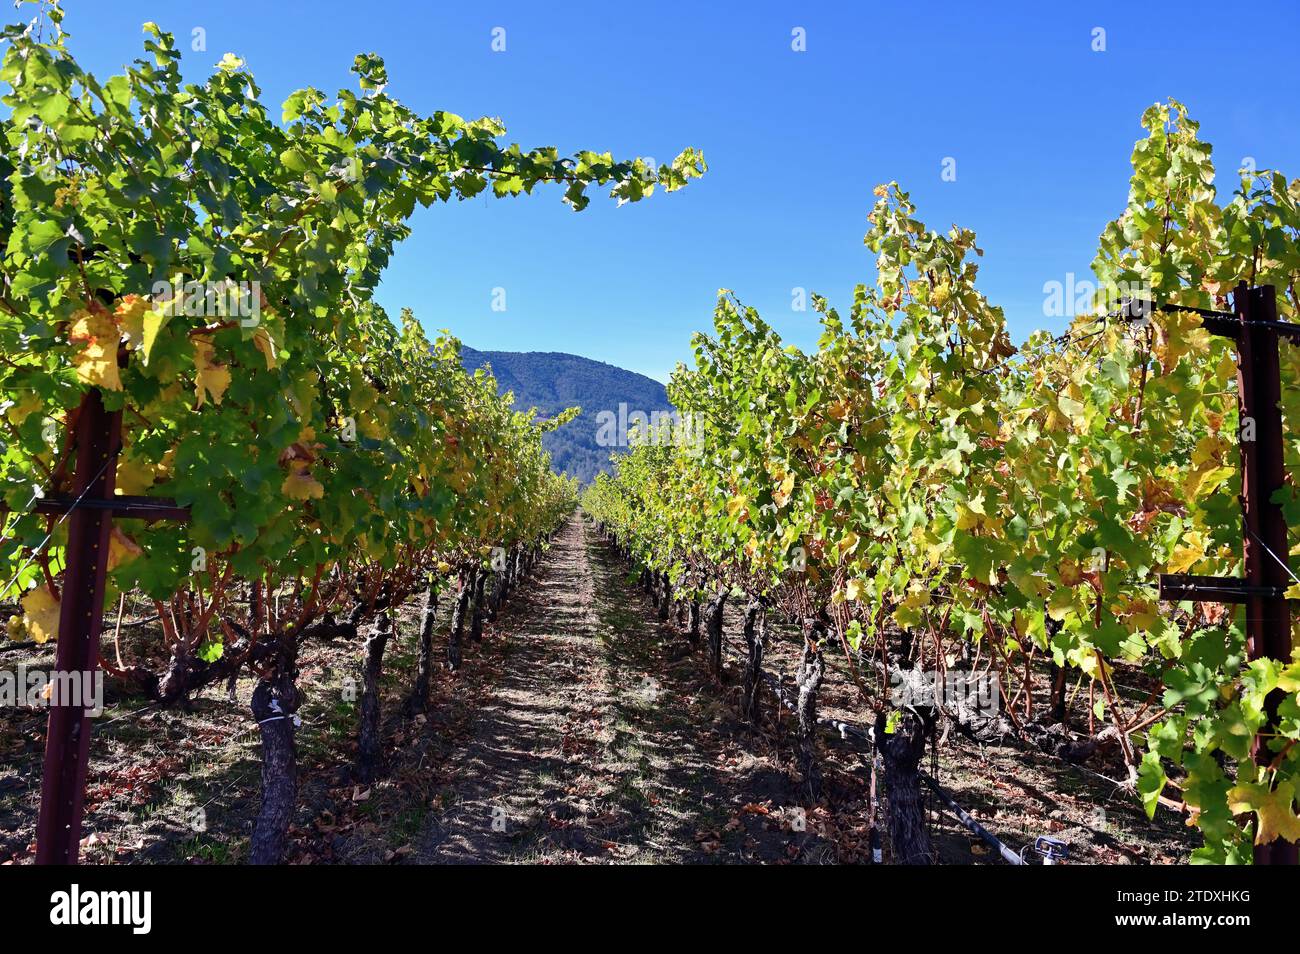 Vines revealing the early tints of autumn fill the landscape in Napa Valley. Stock Photo